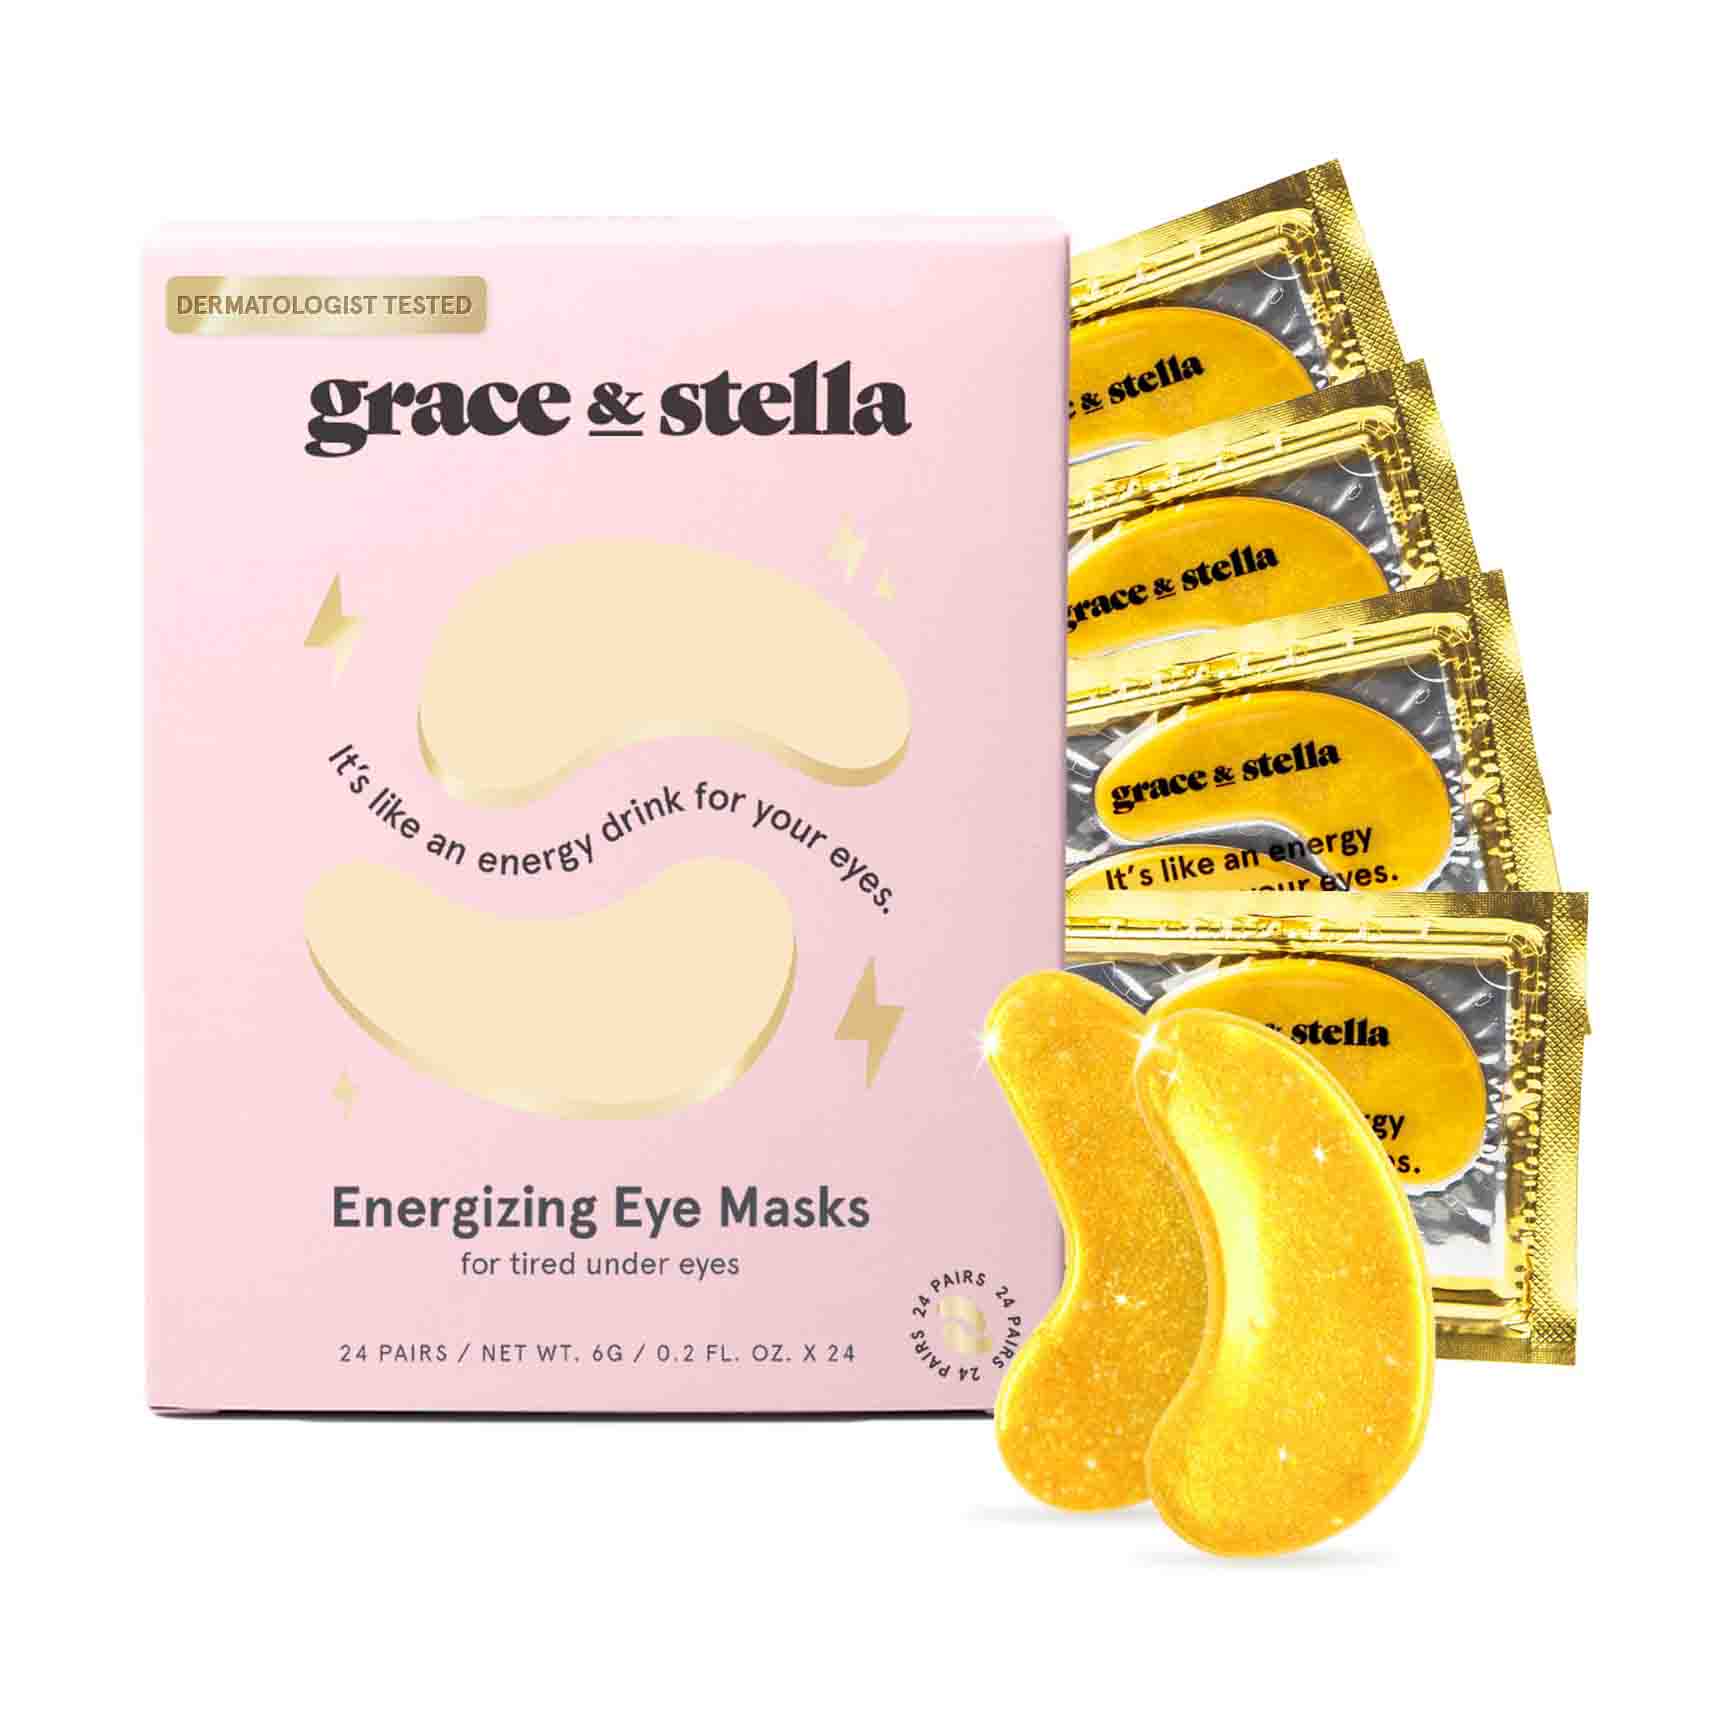 grace & stella Under Eye Mask with gold eye patches